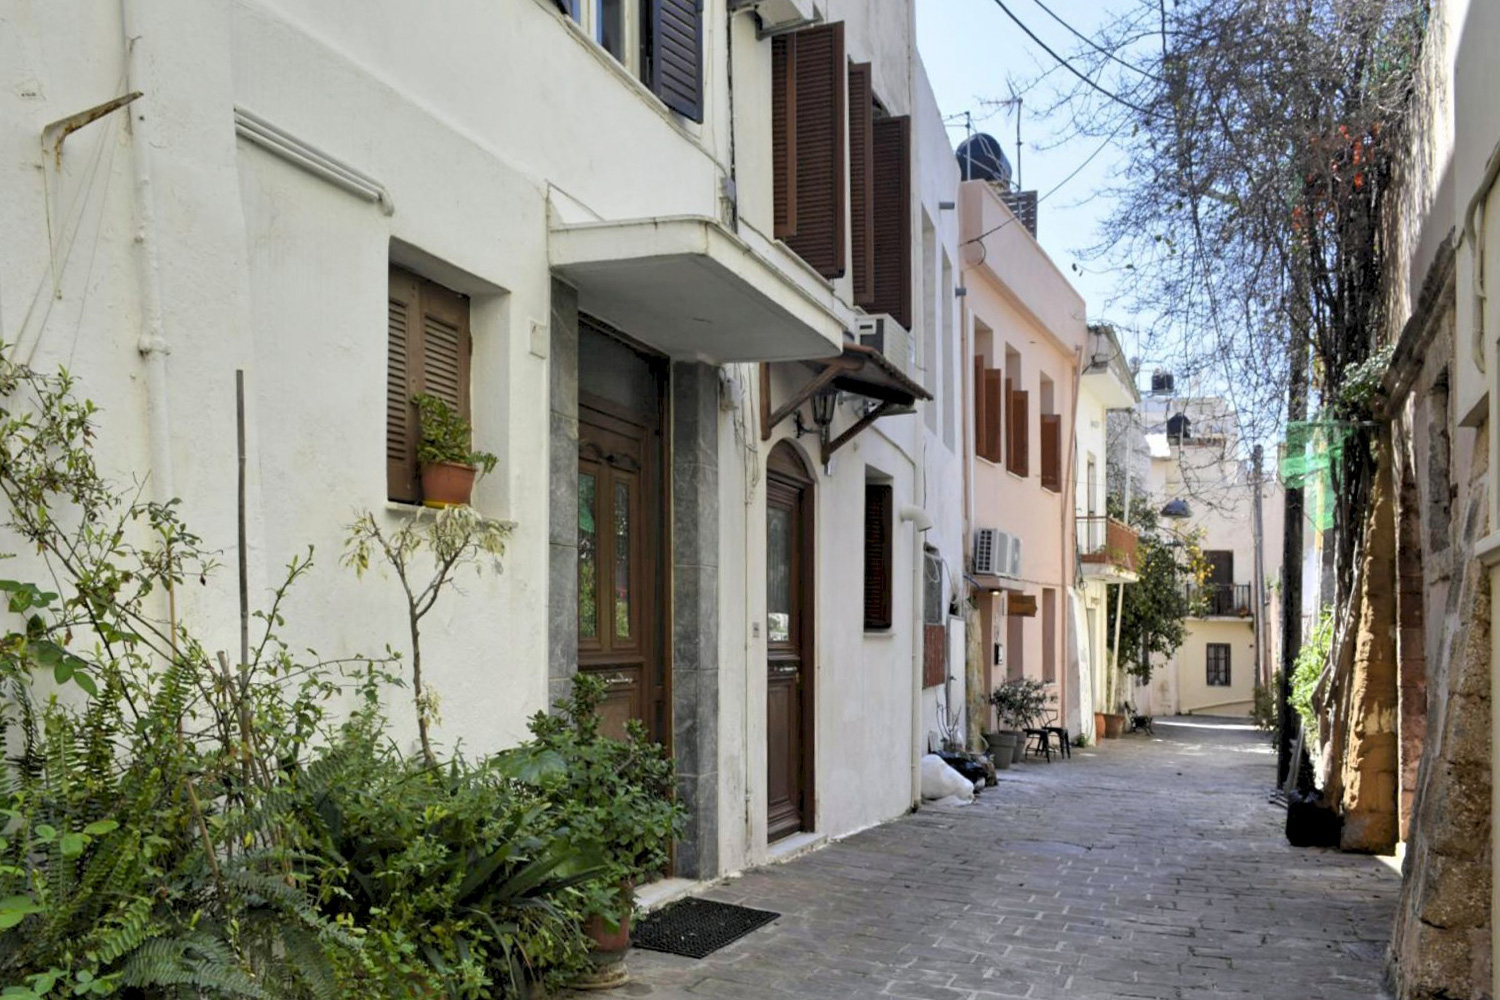 Splangia Alley